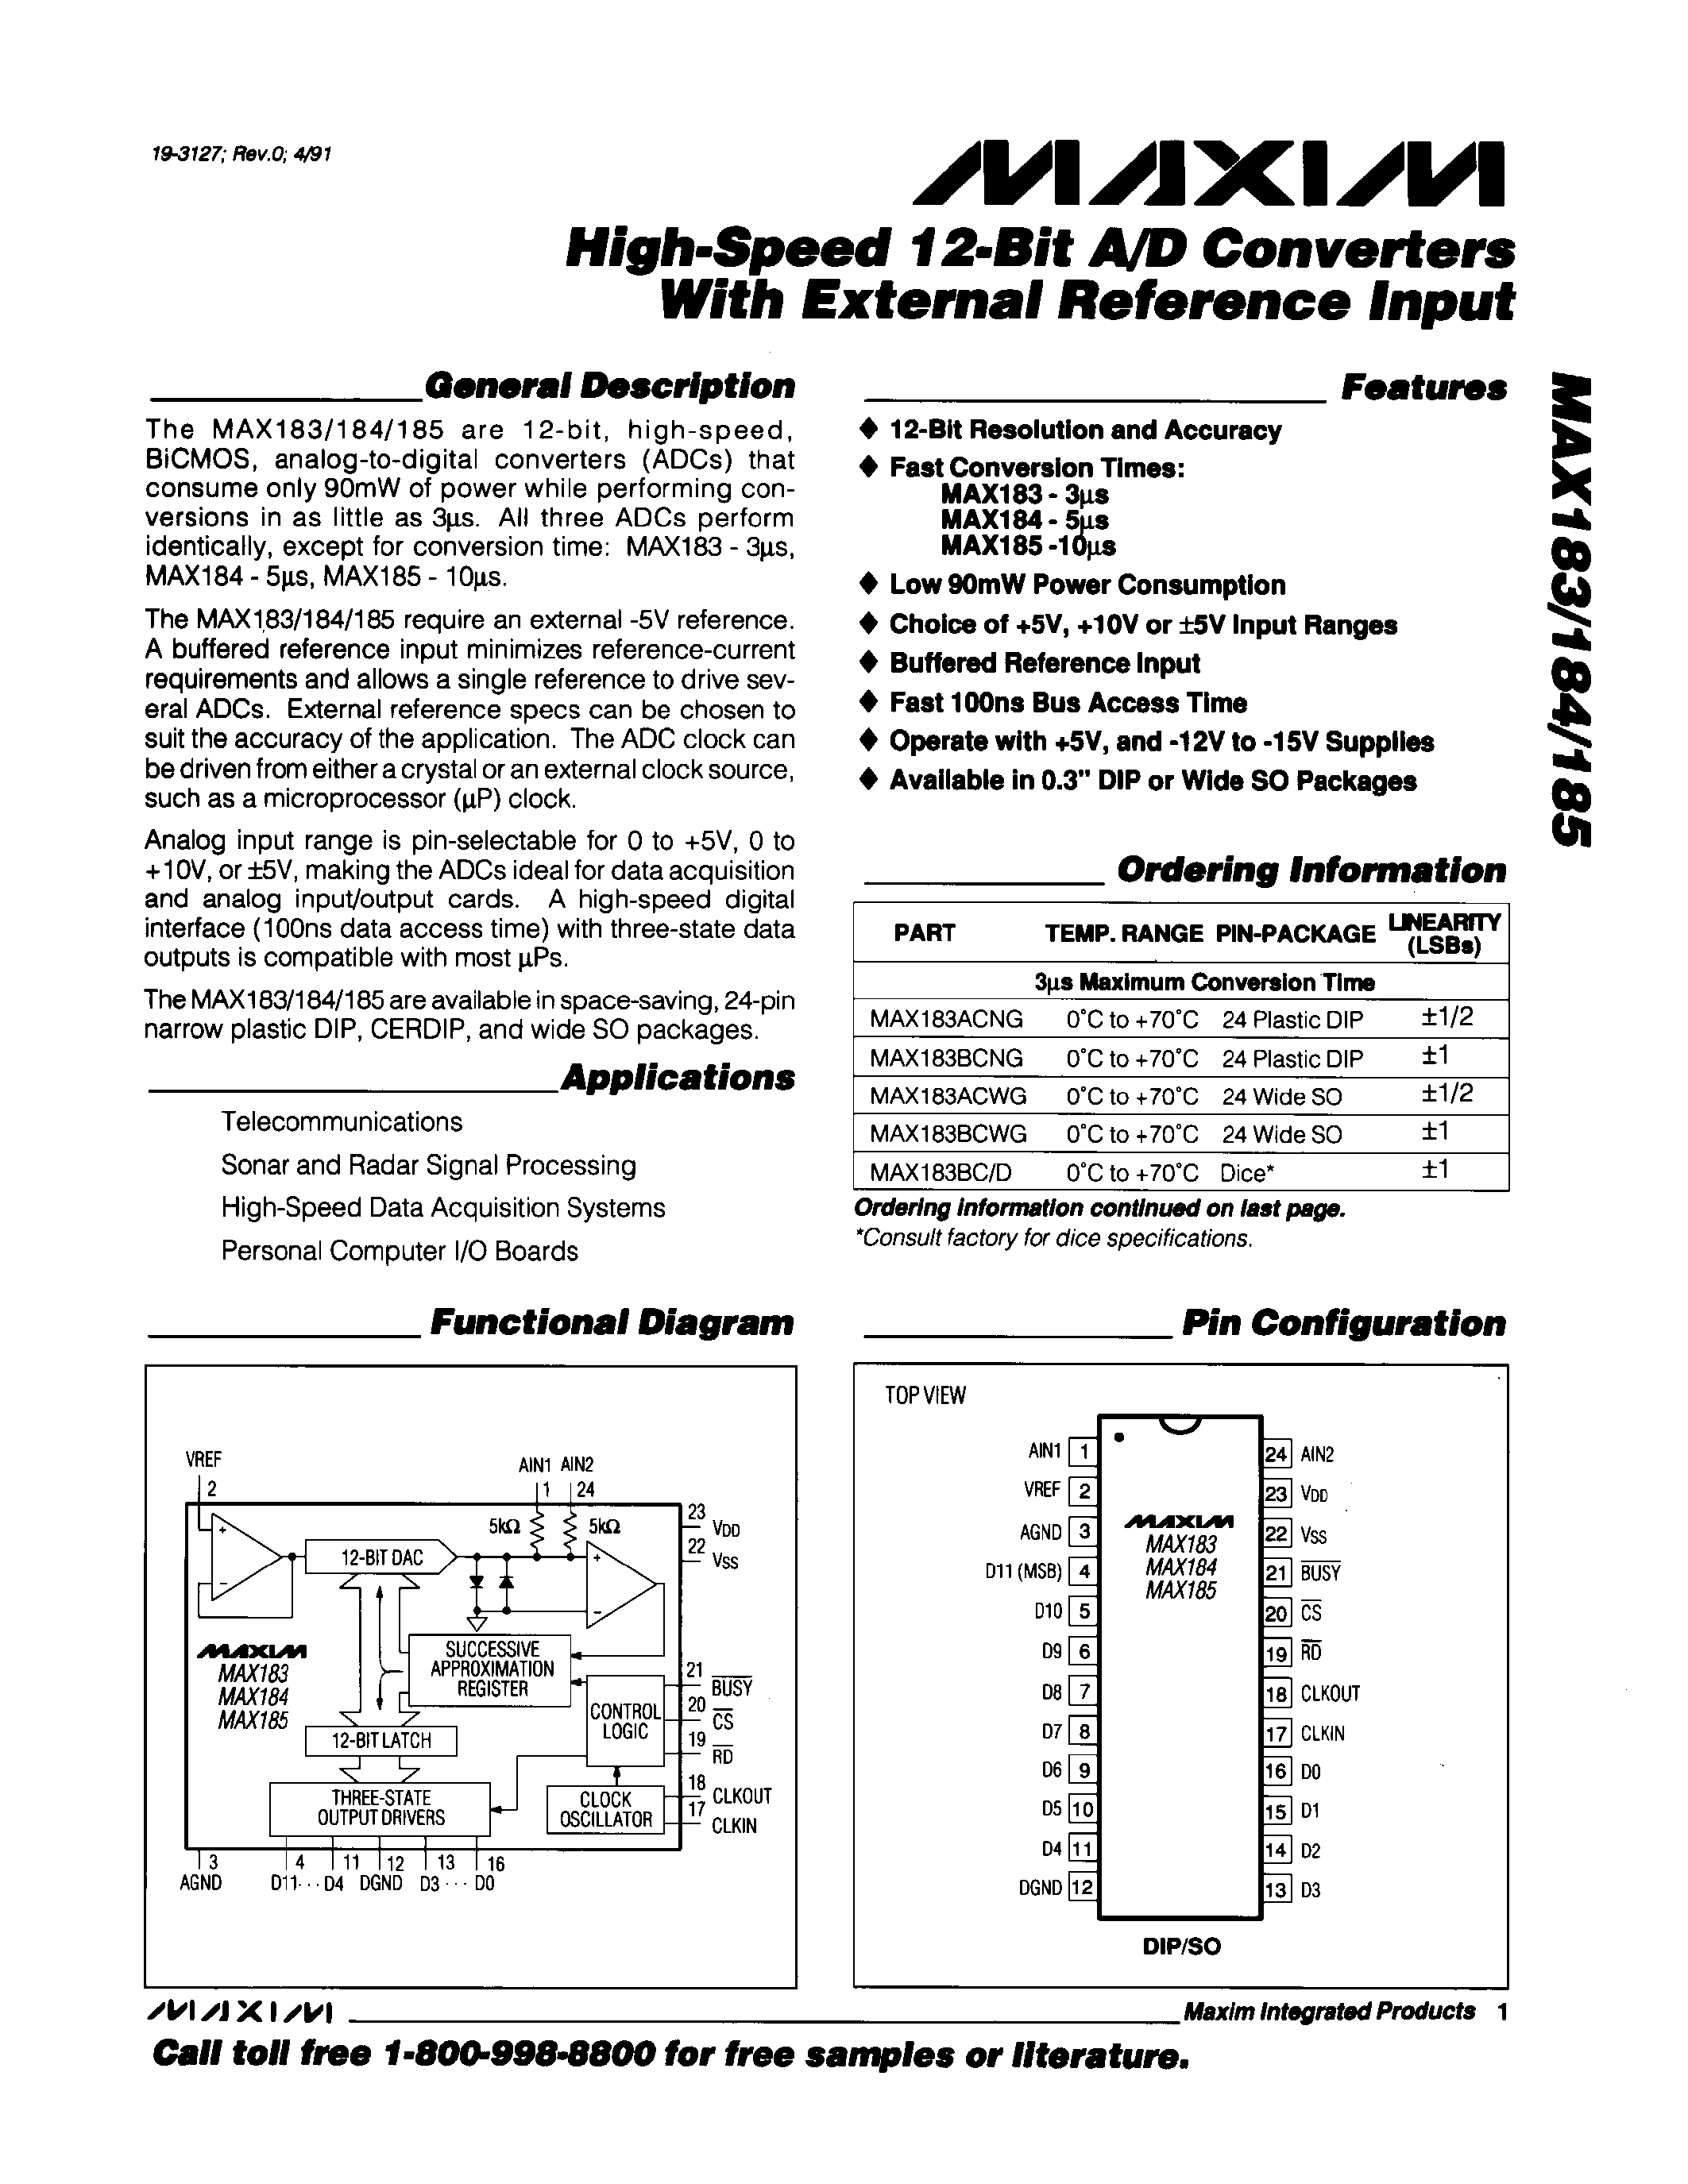 Datasheet MAX184BC/D - High-Speed 12-Bit A/D Converters With External Refernce input page 1